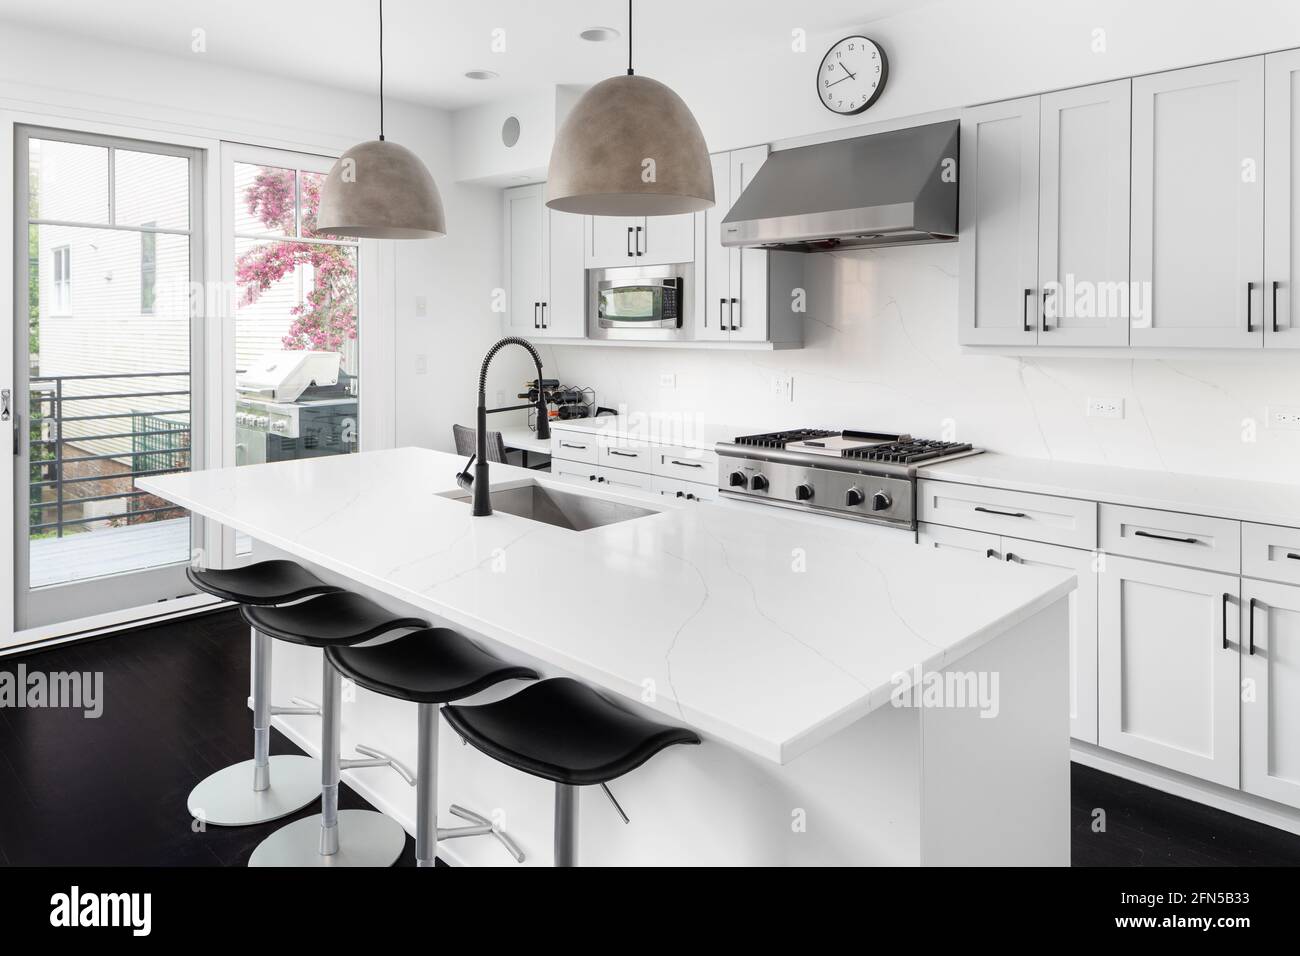 An elegant white kitchen with Thermador stainless steel appliances, large island with a granite countertop, and modern lights hanging above. Stock Photo